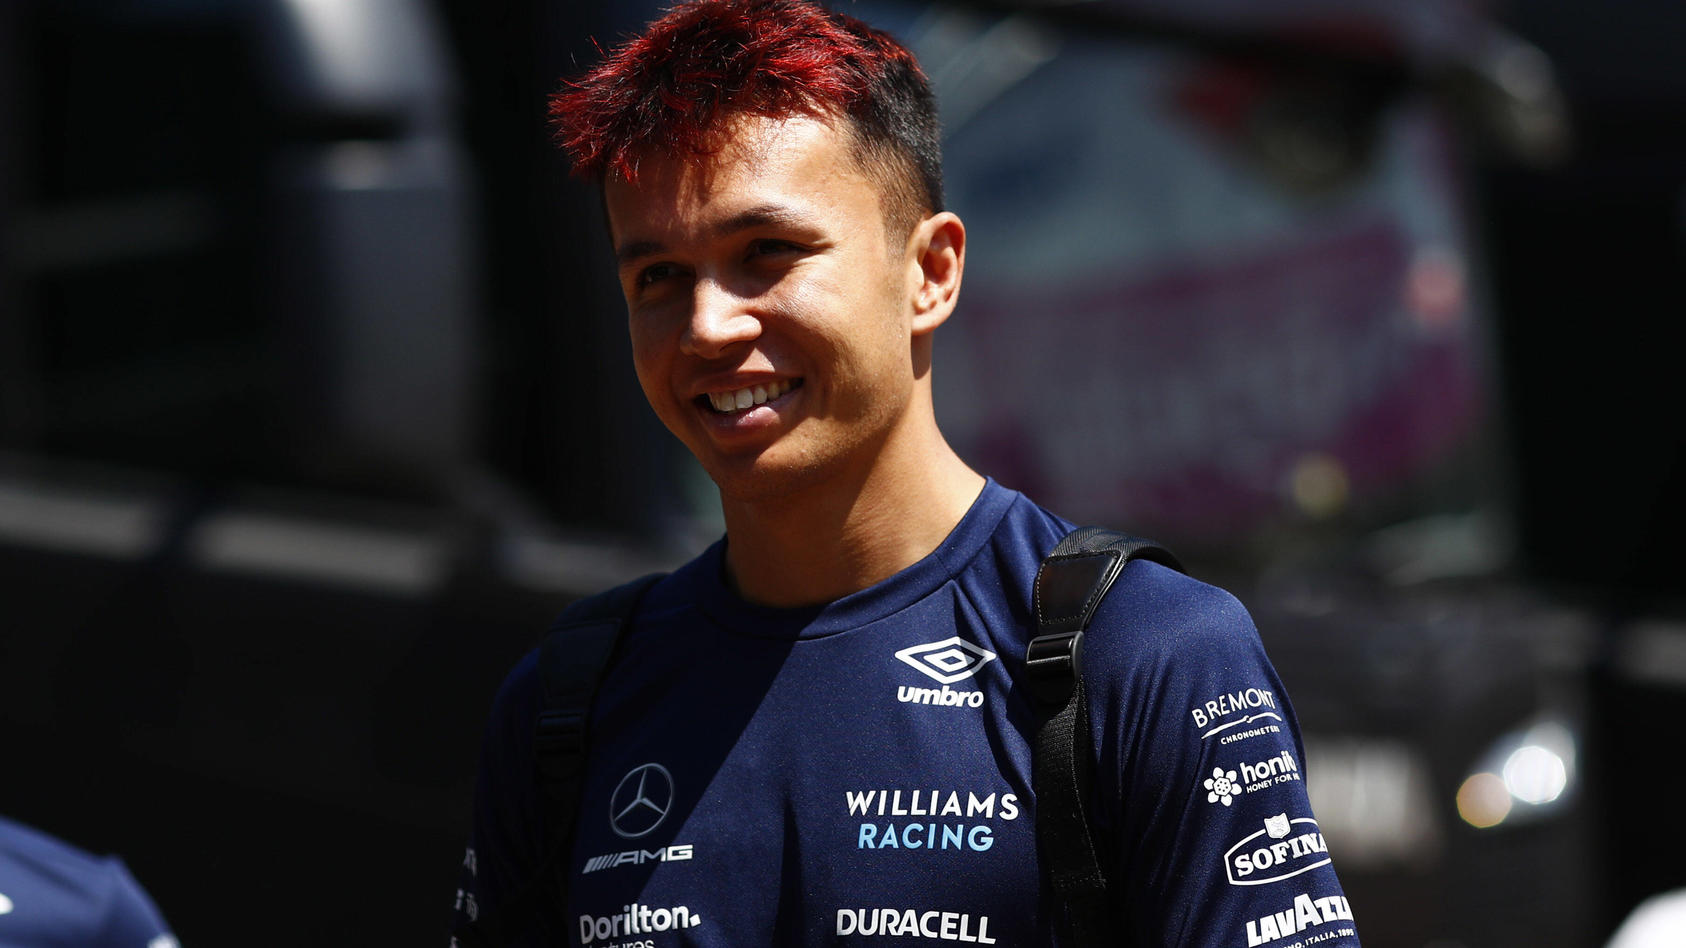  Formula 1 2022: French GP CIRCUIT PAUL RICARD, FRANCE - JULY 22: Alex Albon, Williams Racing during the French GP at Circuit Paul Ricard on Friday July 22, 2022 in Le Castellet, France. Photo by Alastair Staley / LAT Images Images PUBLICATIONxINxGER